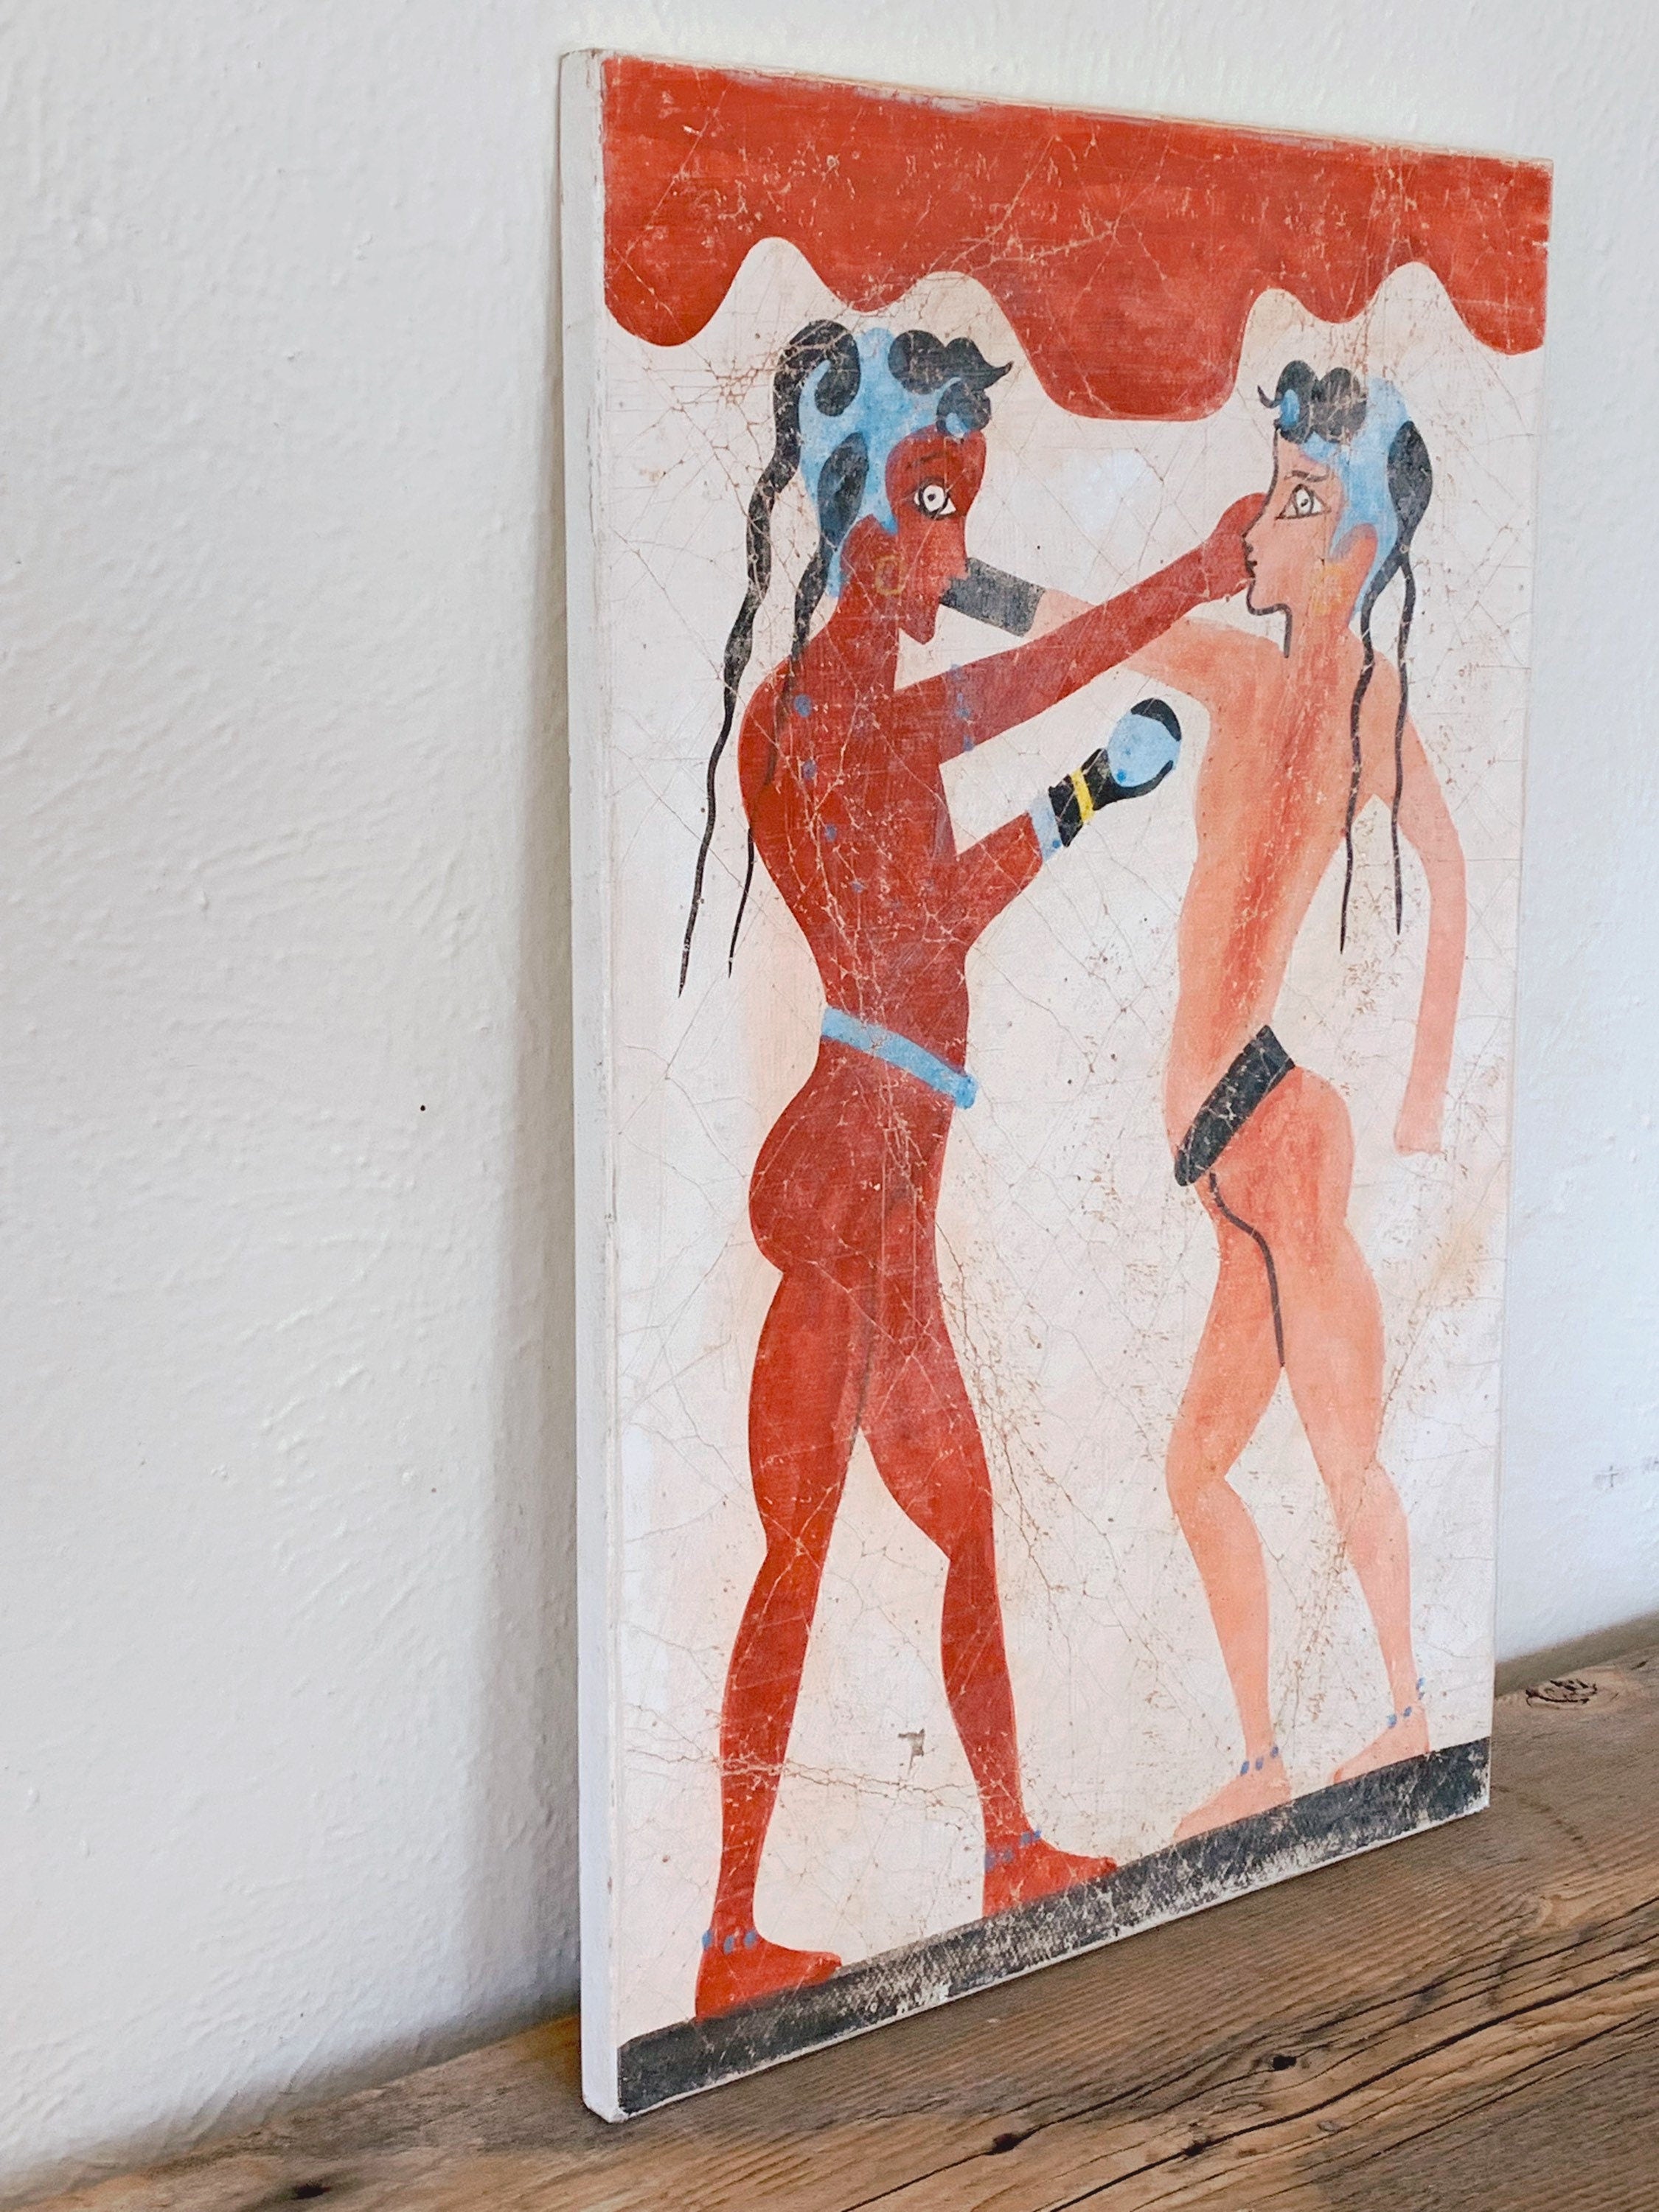 Vintage Hand Made Greek Fresco Painting of “The Boxing Children” from Akrotiri | Quirky Fun Wall Art Home Decor | Made in Greece